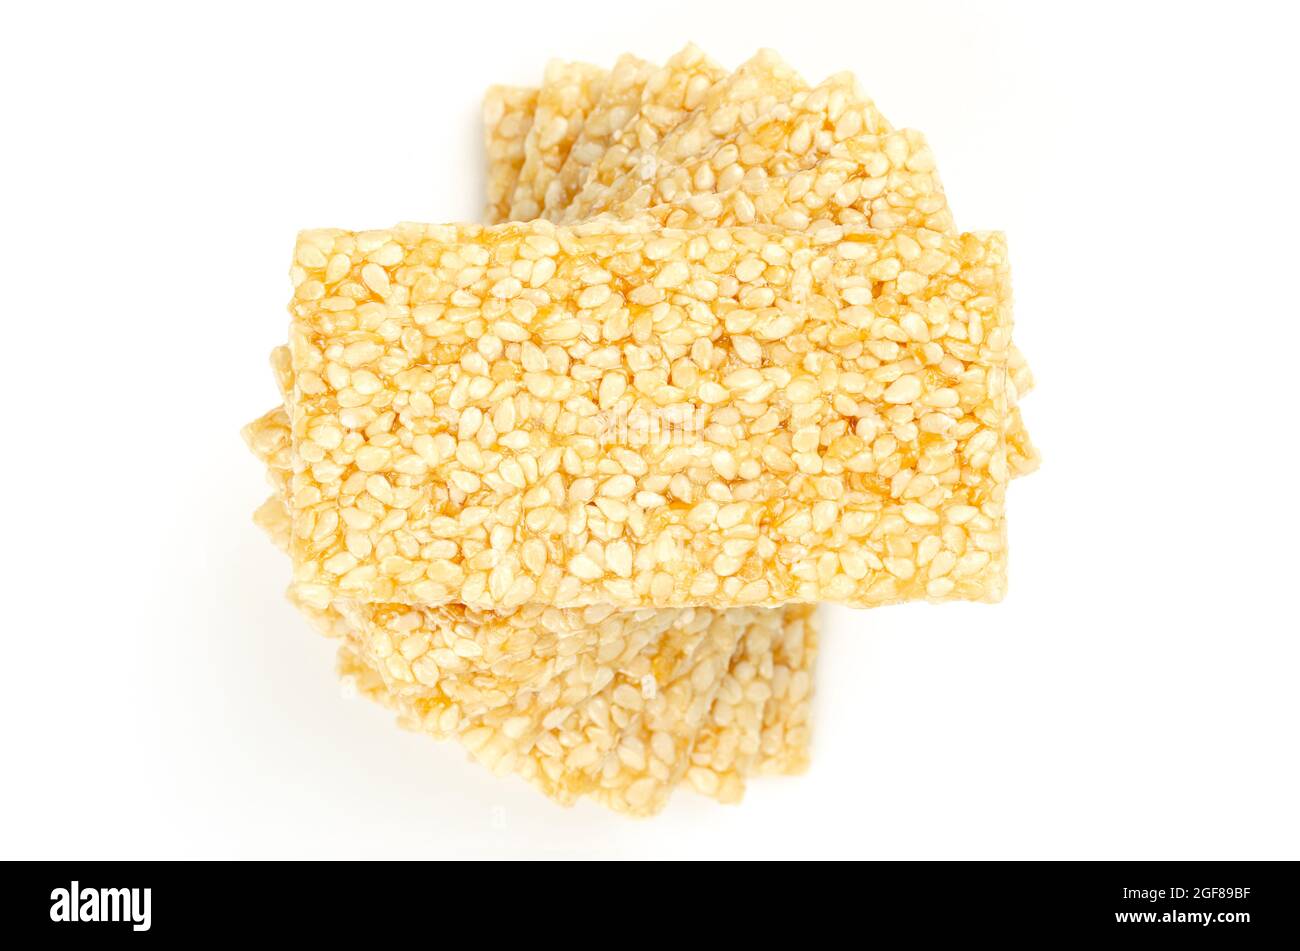 Pile of sesame brittle bars, from above, on white background. Sesame seed candy bars or also crunch, a confection of sesame seeds and honey. Stock Photo